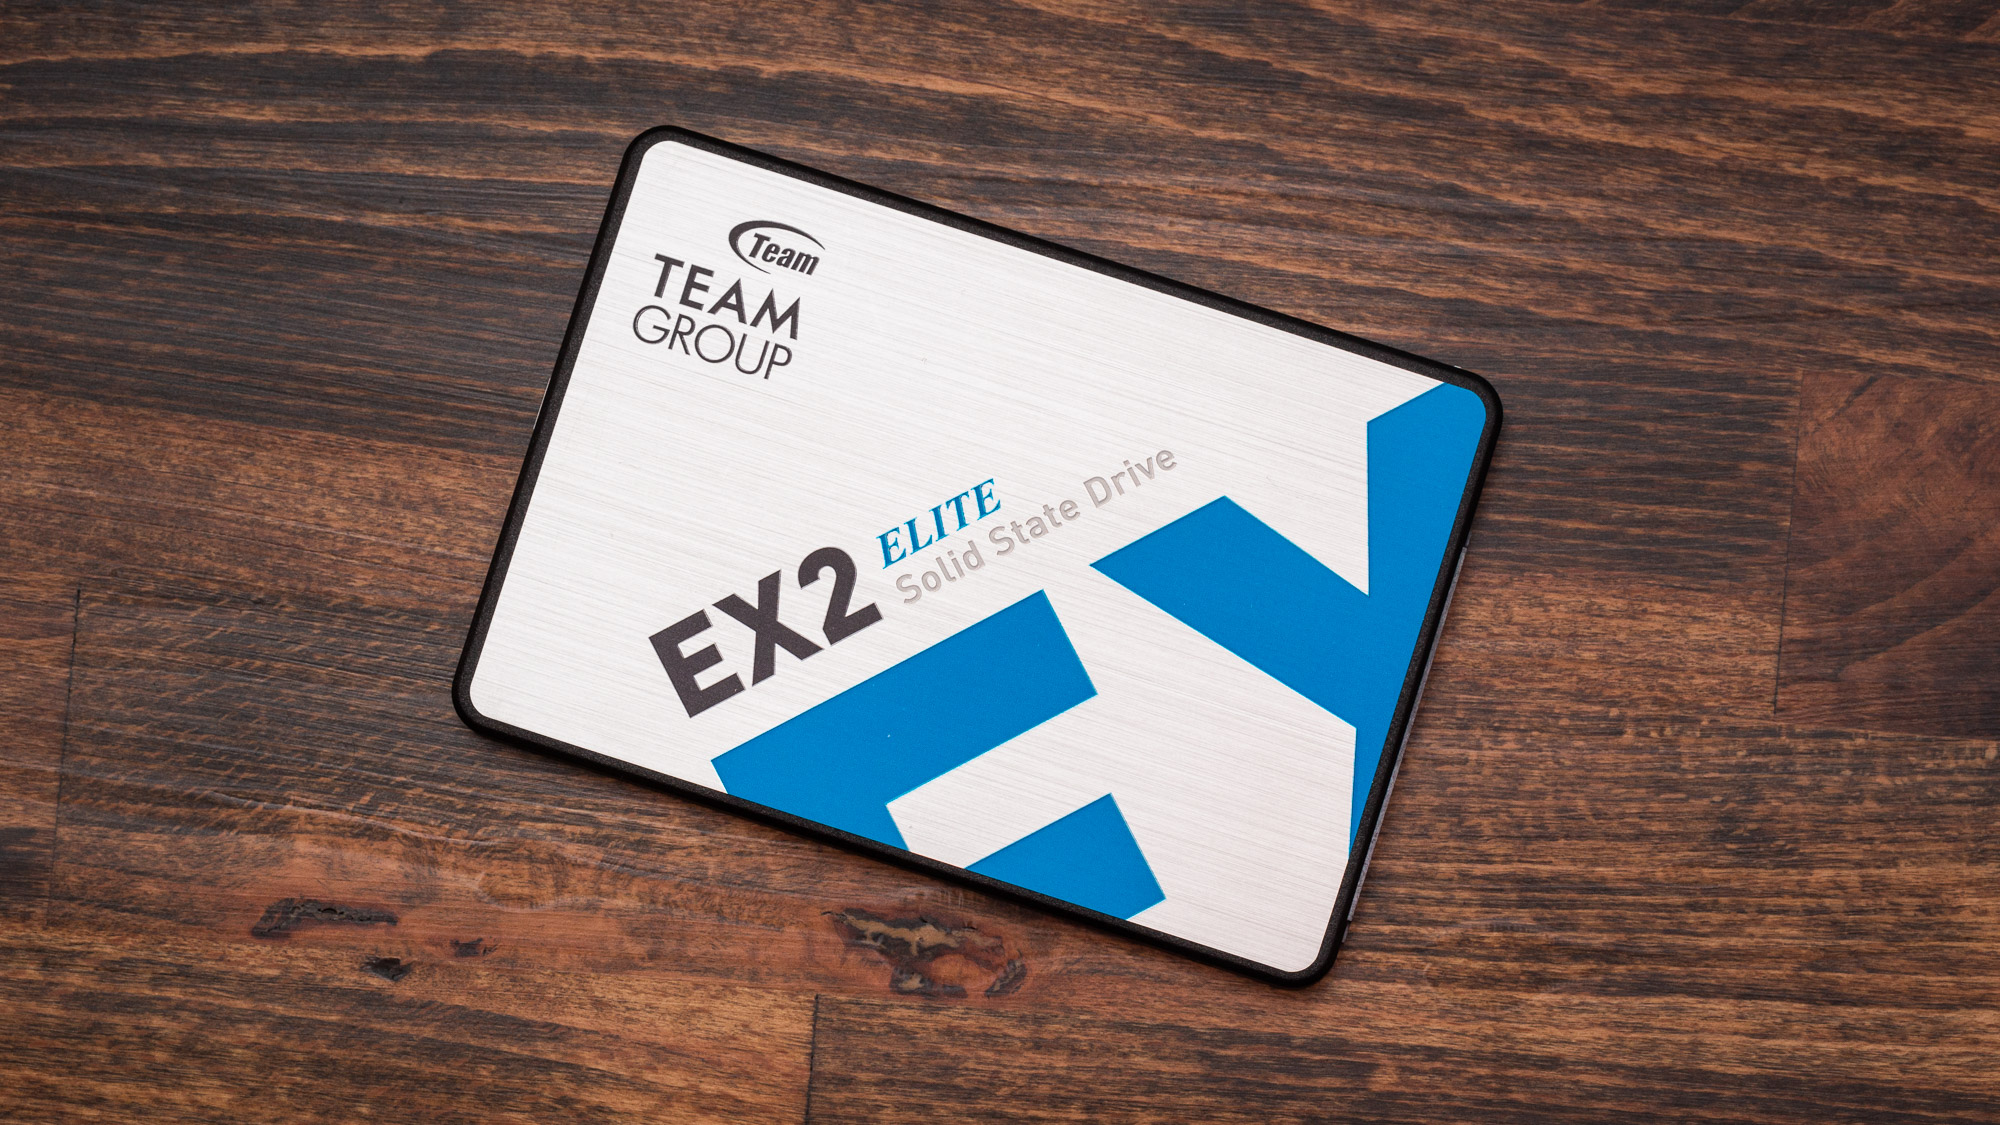 Team Group EX2 SATA SSD Review: Affordable but Lacking